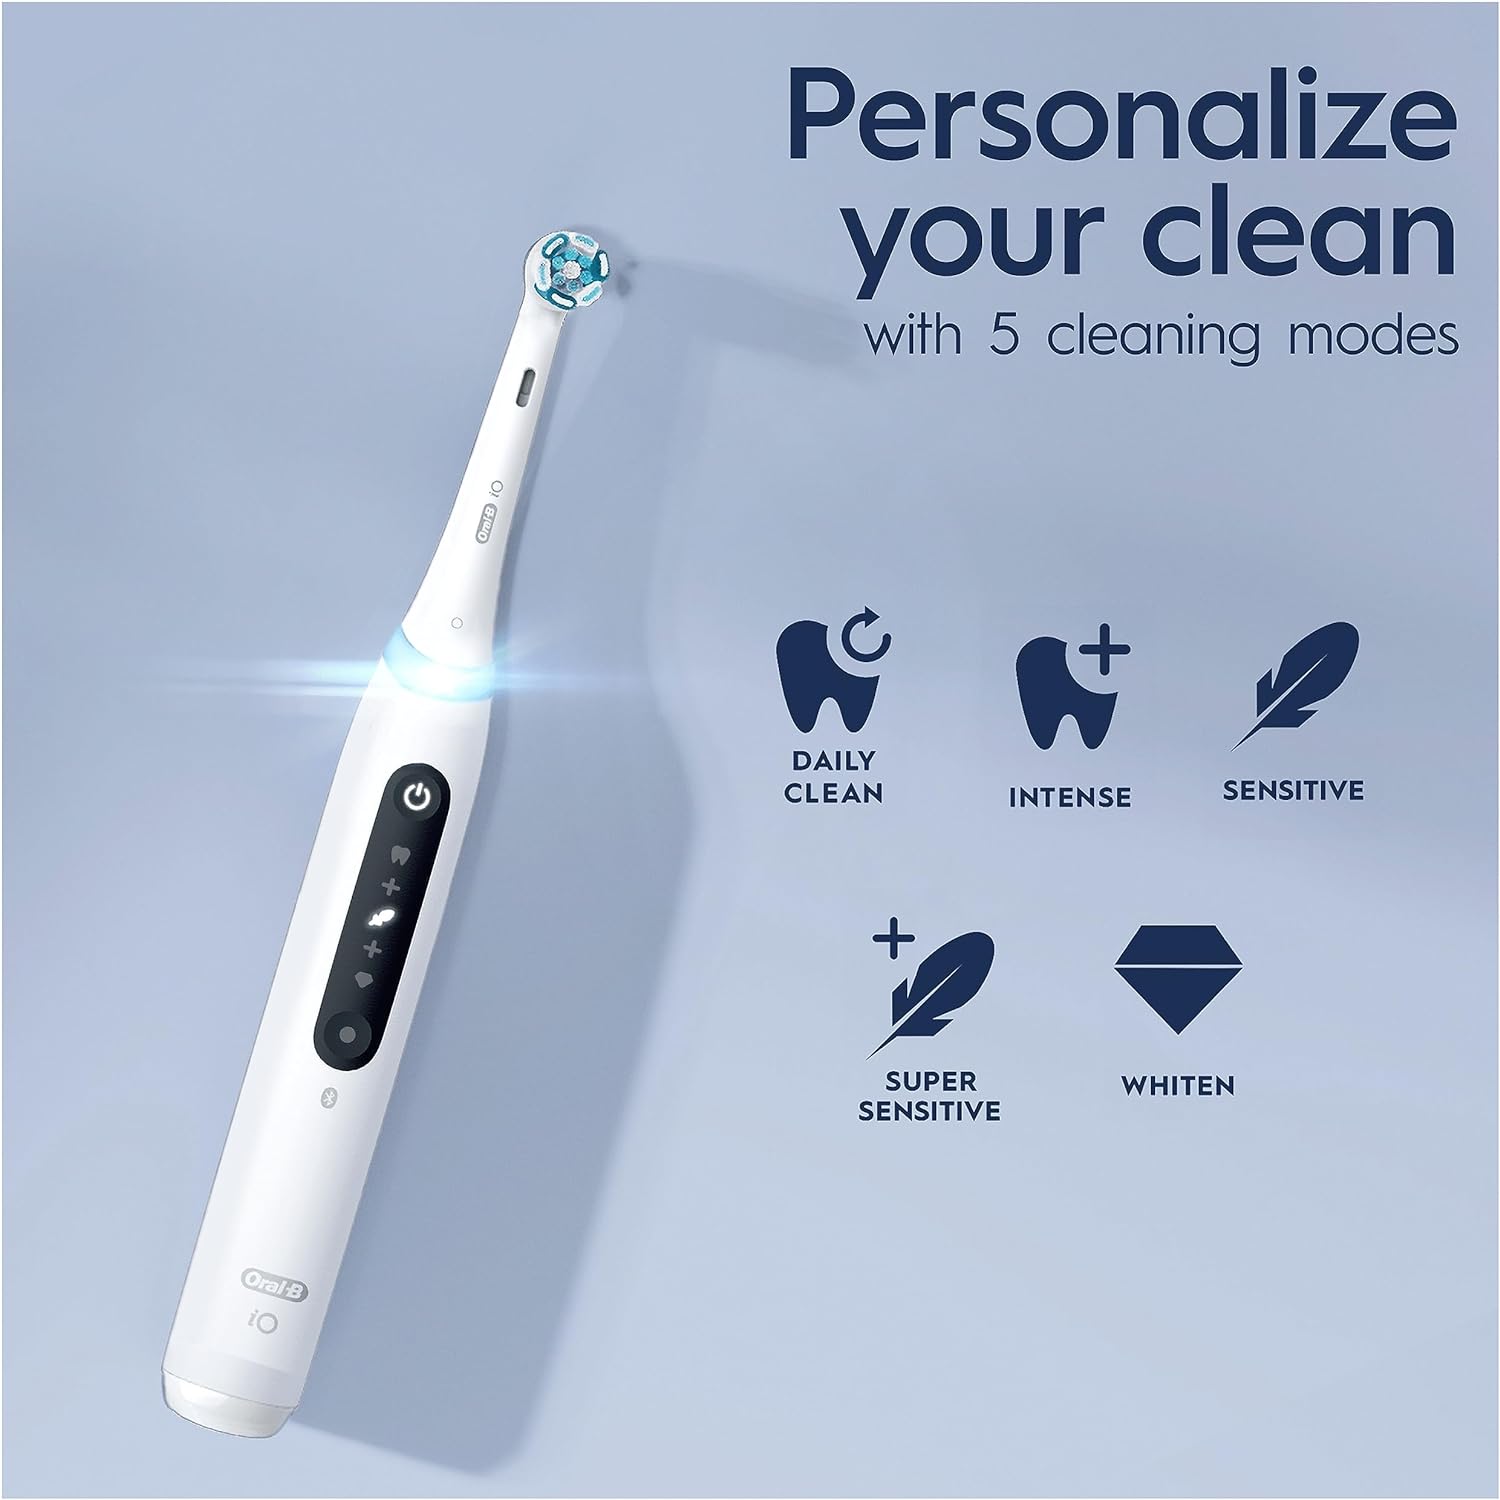 Oral-B iO 5 Electric Toothbrush, with Revolutionary Magnetic Technology - White